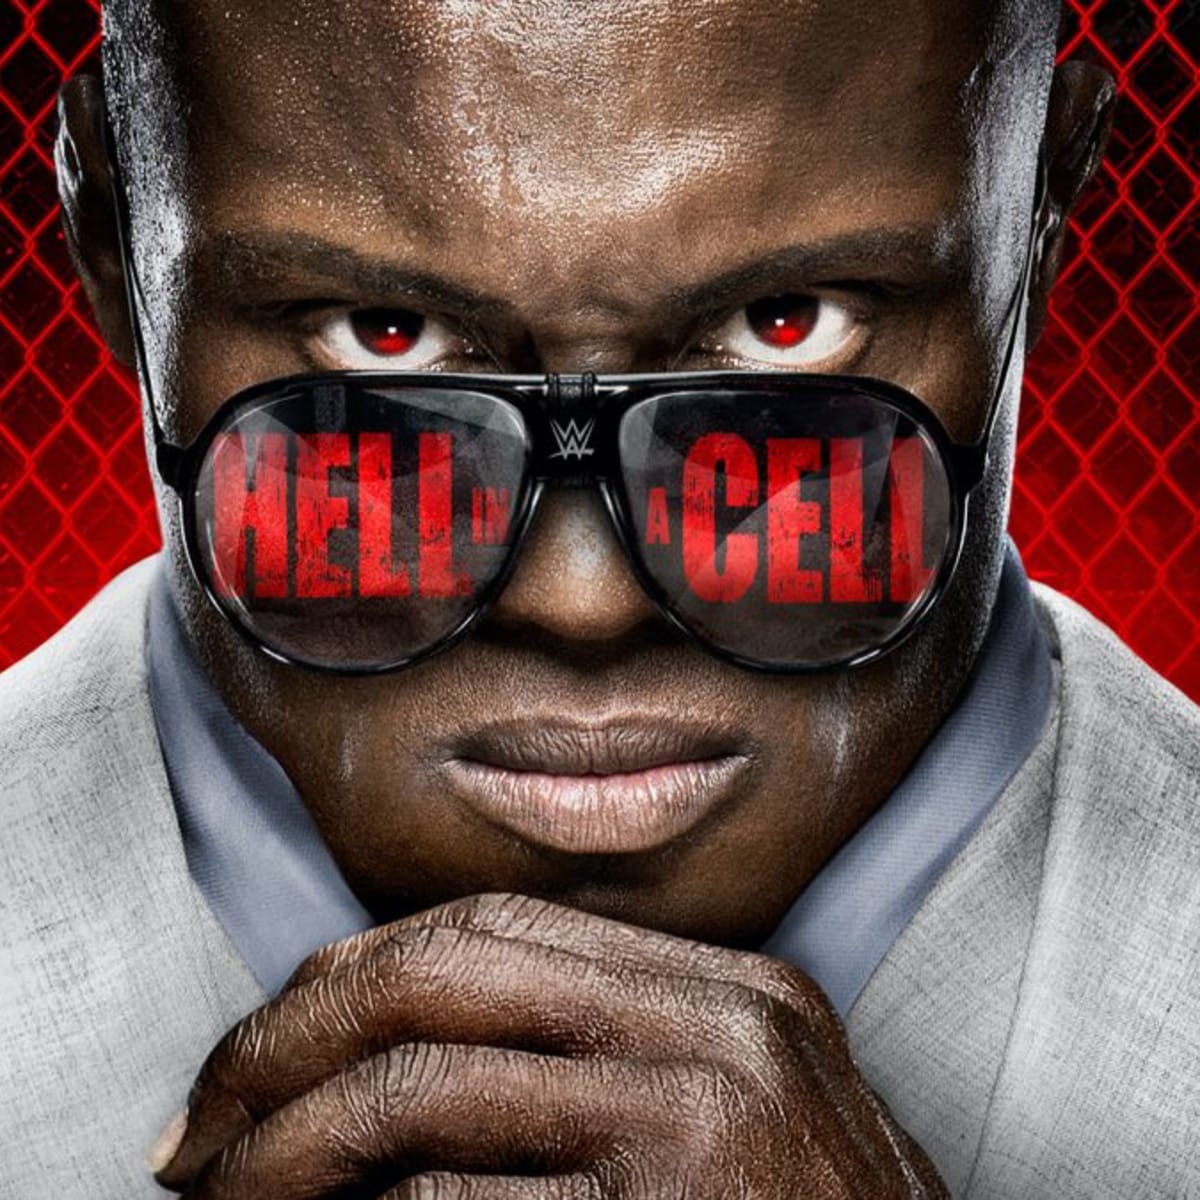 Wwe hell in a cell 2021